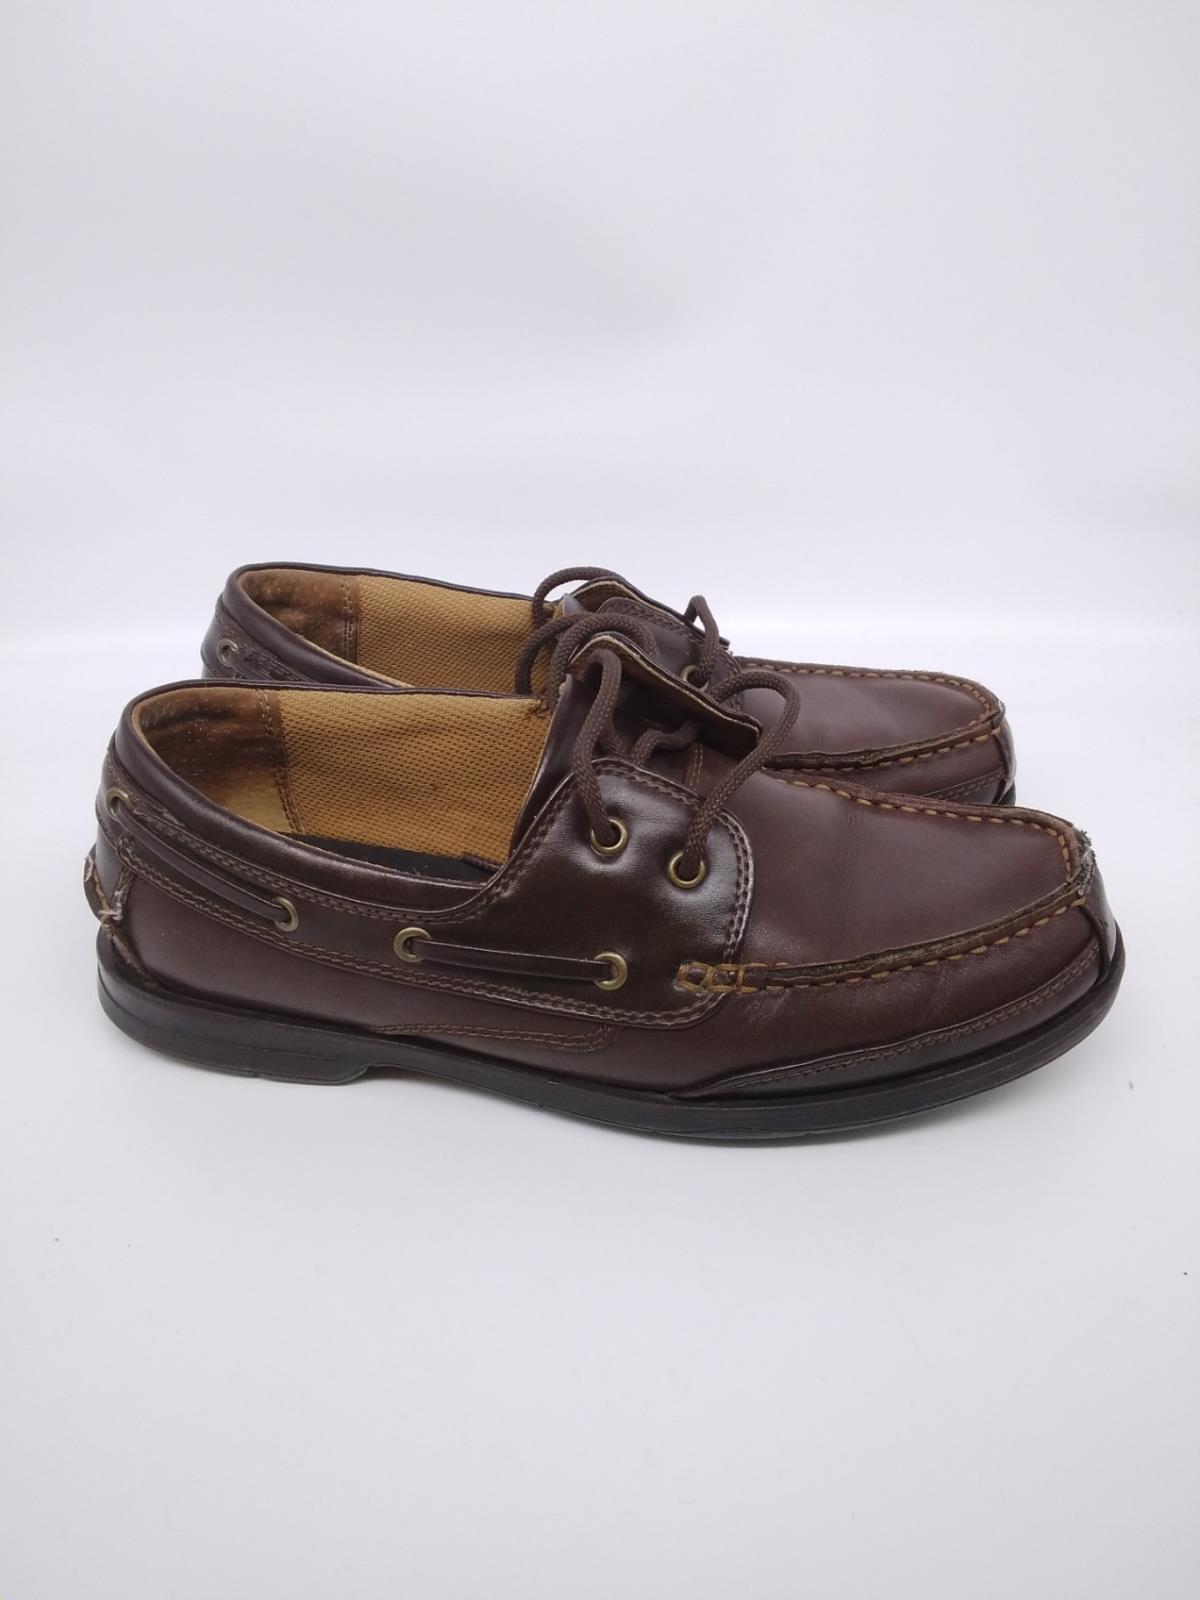 Dexter Mens Brown Lace Up Round Toe Leather Casual Boat Shoes Size 7 | eBay